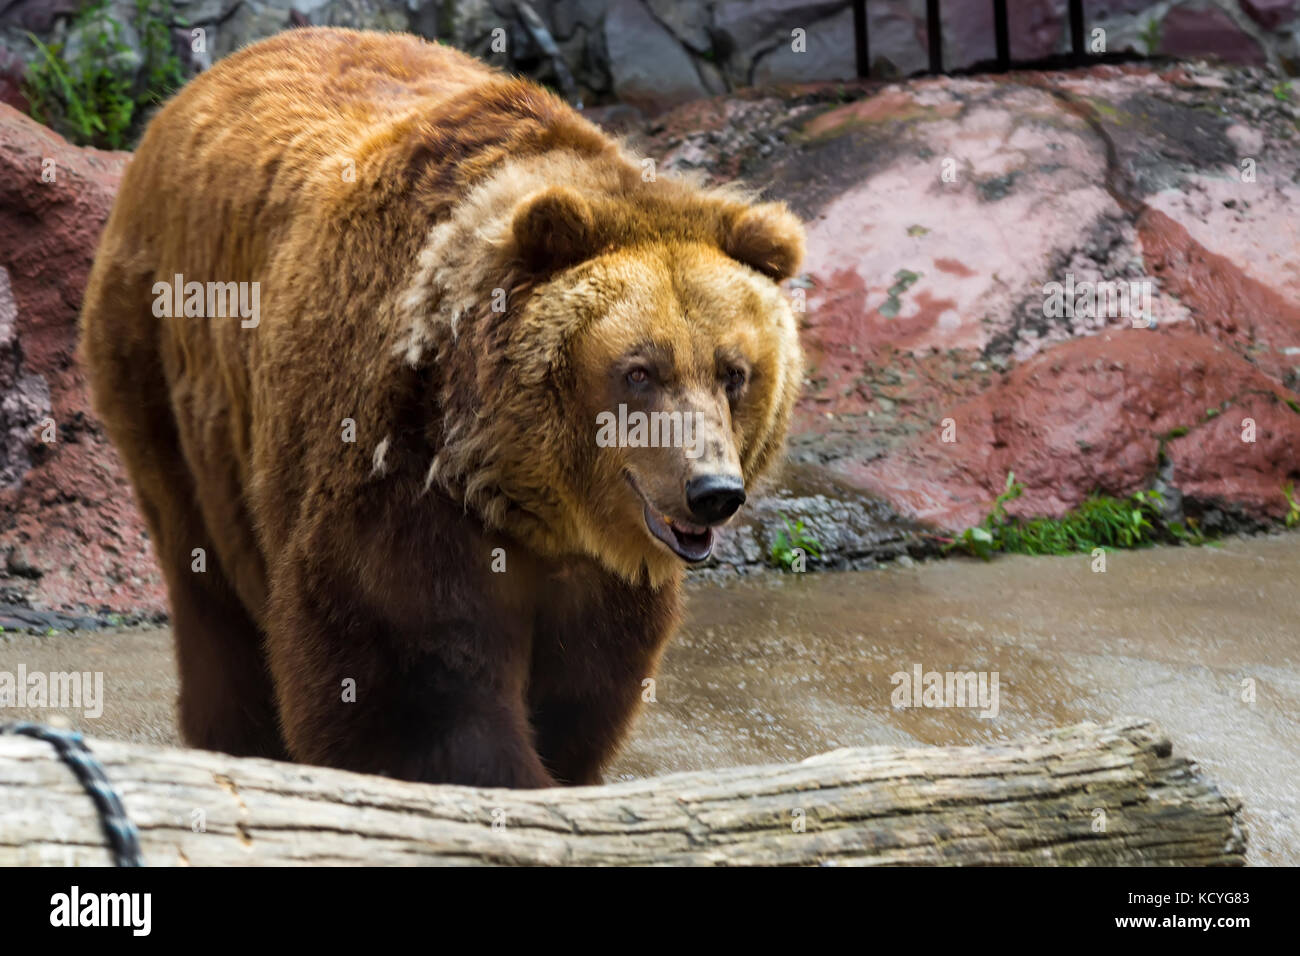 The brown bear came out of the cave enclosure in the zoo Stock Photo